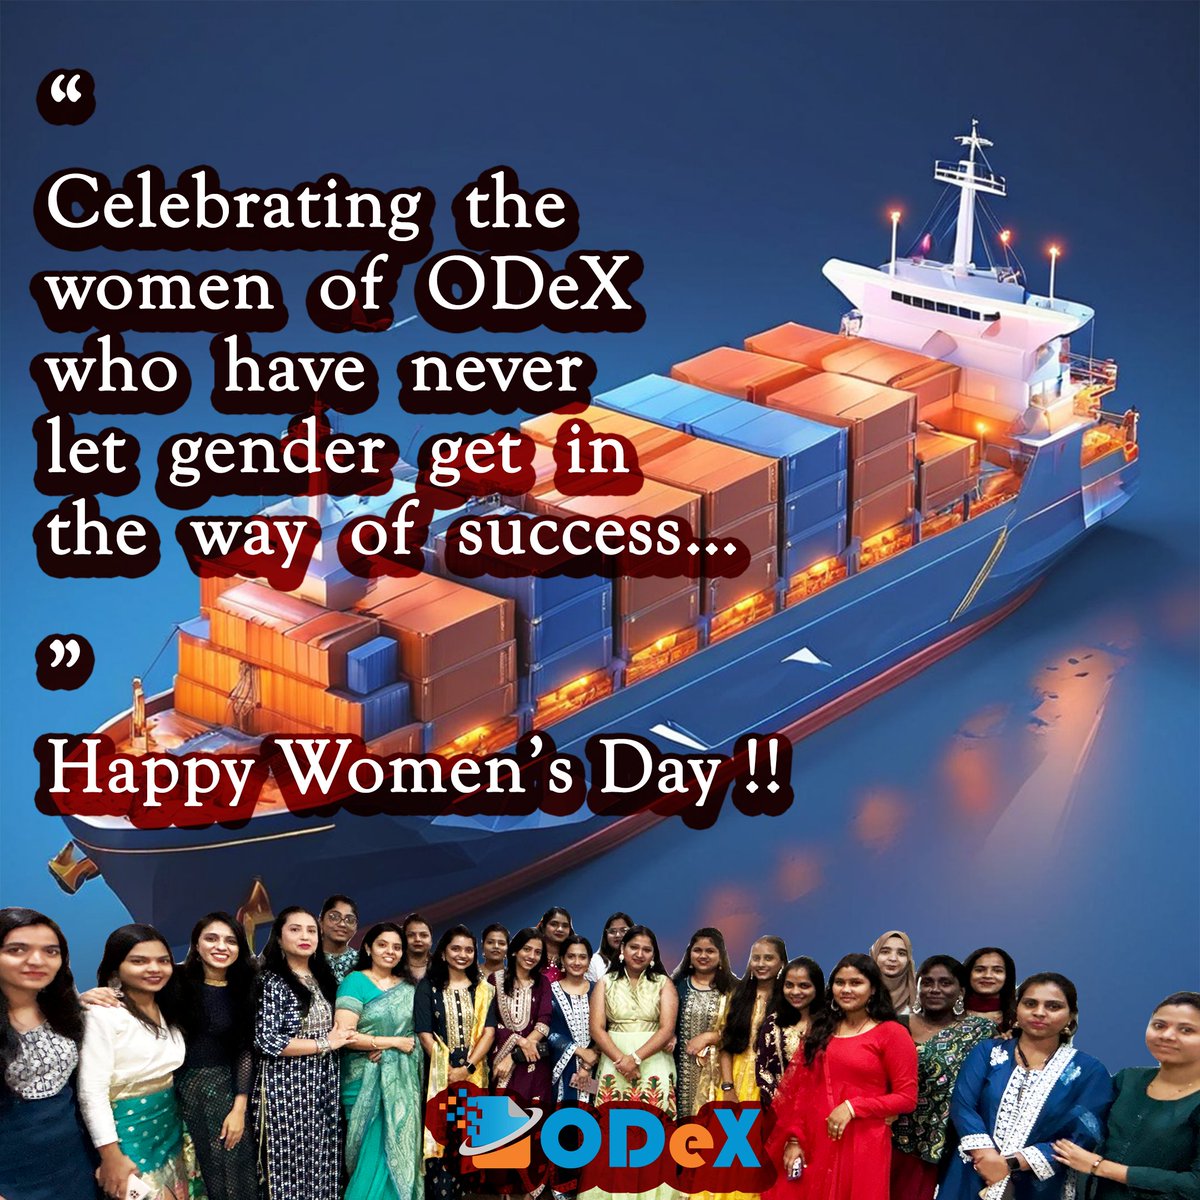 Celebrating the women of ODeX who have never let gender get in the way of success... Happy Women's Day!!

#ODeX #ODeXGlobal #IWD #InternationalWomensDay #WomensDay #womenempowerment #OceanShipping